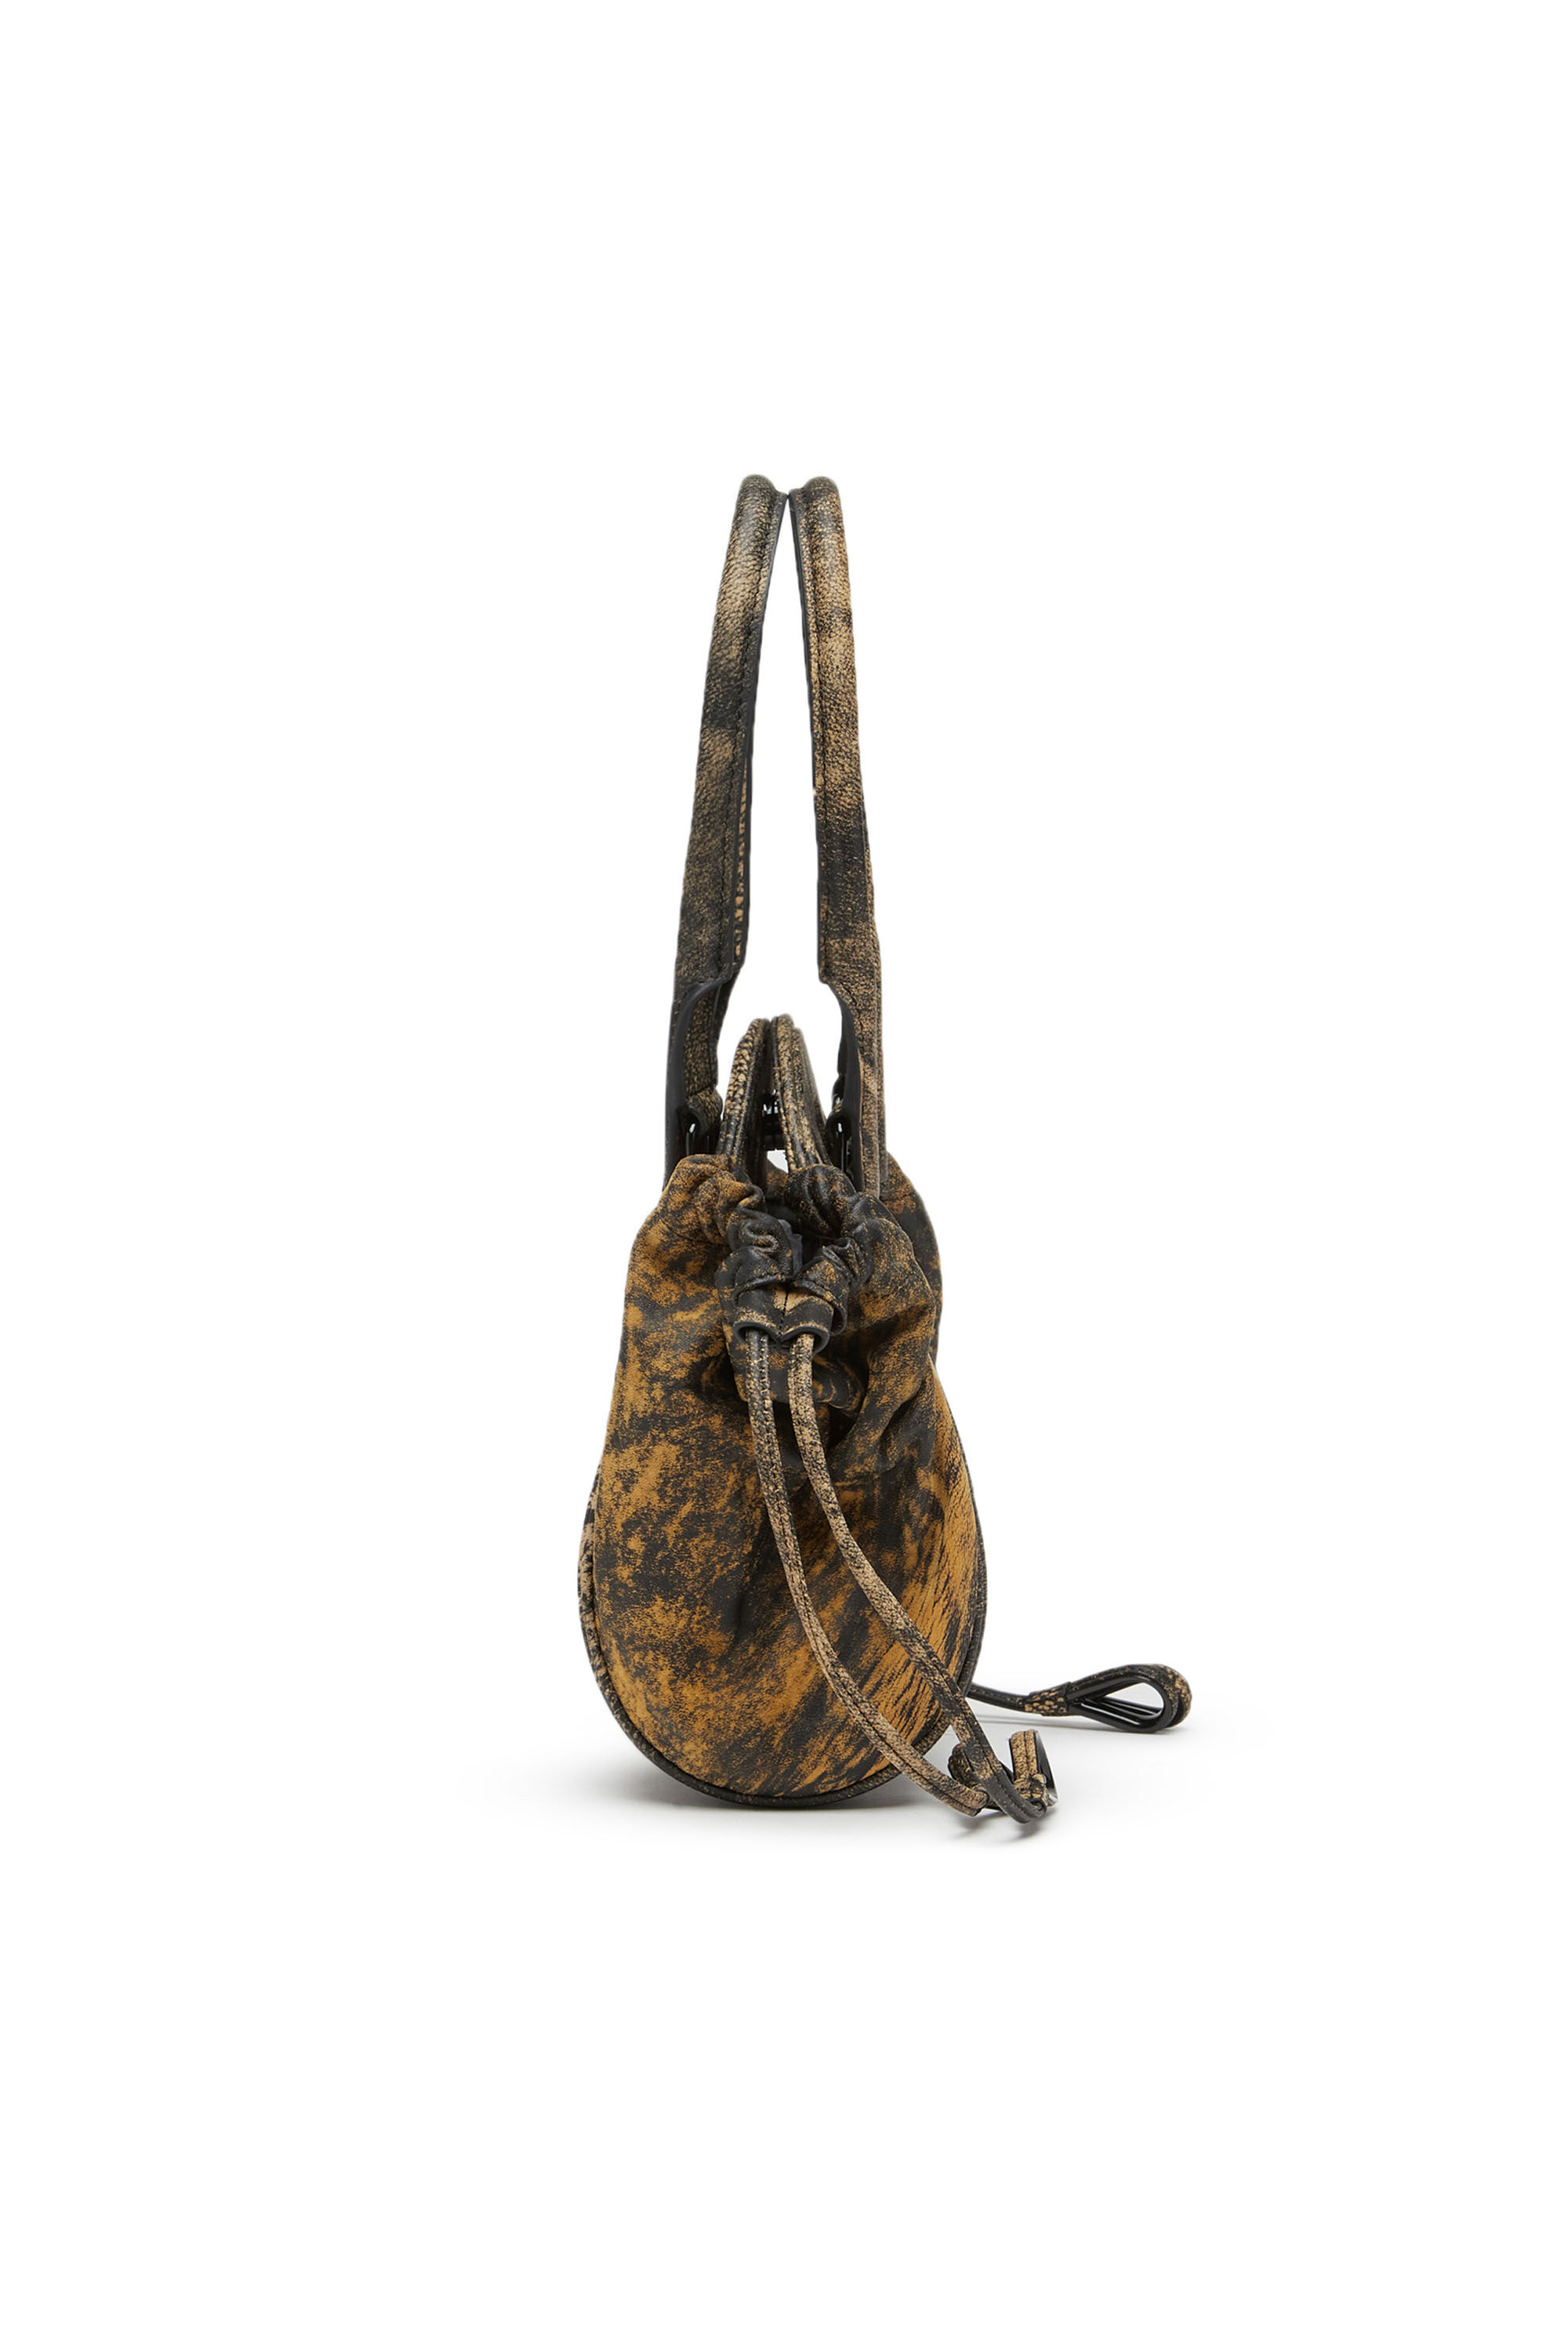 Diesel - 1DR-FOLD XS, Woman 1DR-Fold XS - Oval logo handbag in marbled leather in Brown - Image 4